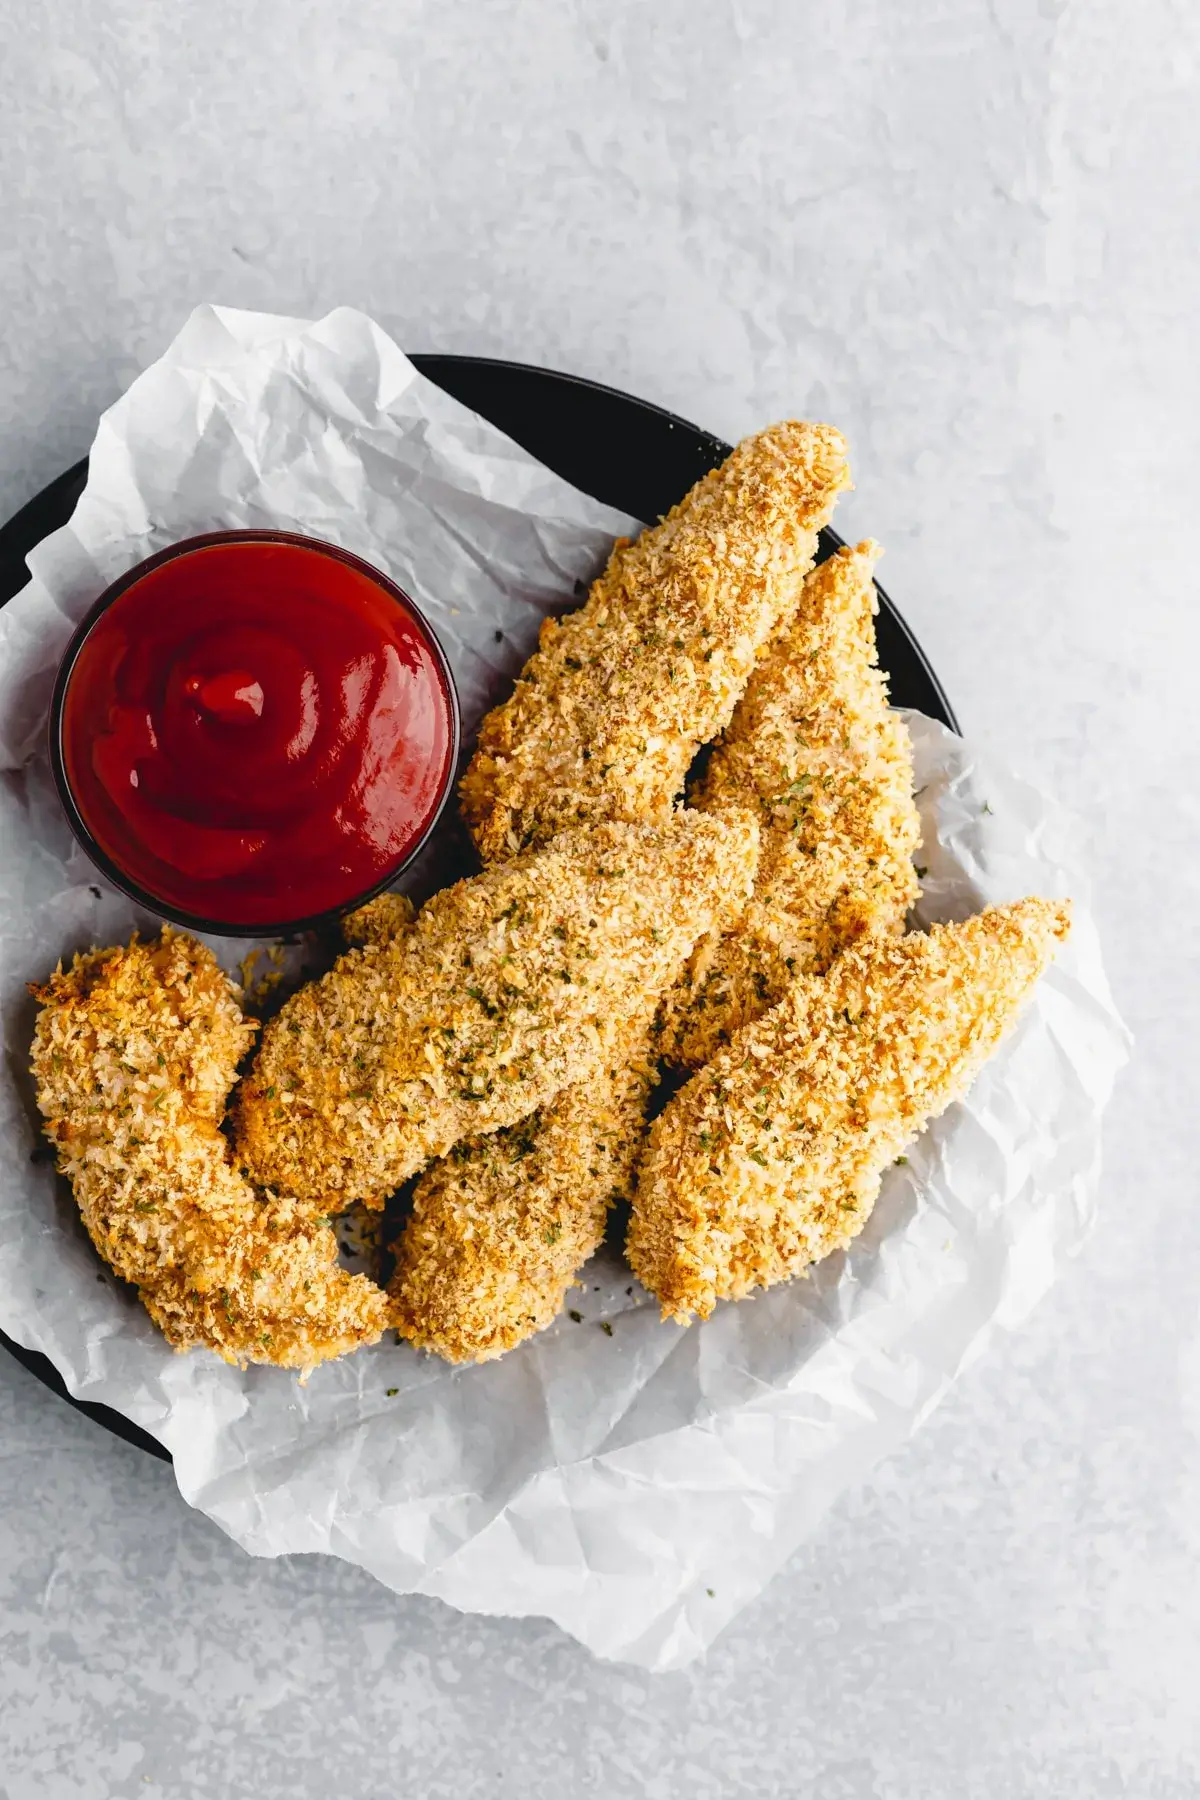 Baked chicken tenders on a plate with sauce